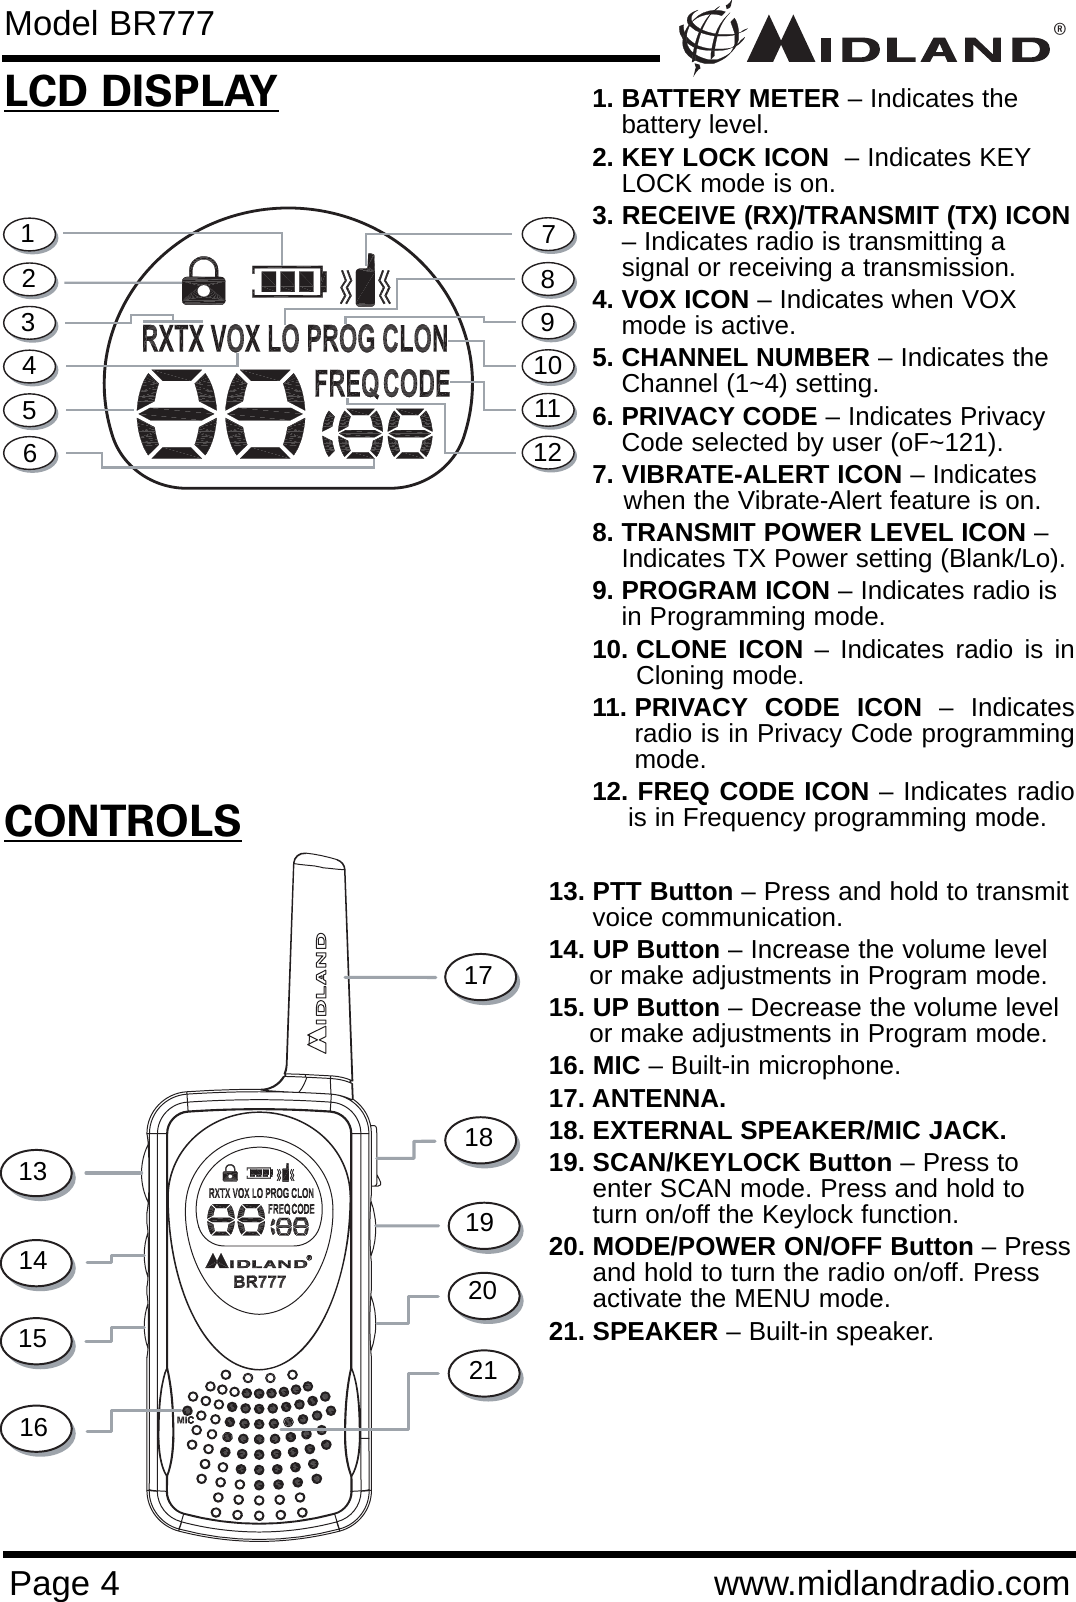 ®Page 4 www.midlandradio.comCONTROLSLCD DISPLAY1. BATTERY METER – Indicates thebattery level.2. KEY LOCK ICON  – Indicates KEYLOCK mode is on.3. RECEIVE (RX)/TRANSMIT (TX) ICON– Indicates radio is transmitting a    signal or receiving a transmission. 4. VOX ICON – Indicates when VOXmode is active.5. CHANNEL NUMBER – Indicates theChannel (1~4) setting.6. PRIVACY CODE – Indicates PrivacyCode selected by user (oF~121).7. VIBRATE-ALERT ICON – Indicates when the Vibrate-Alert feature is on.  8. TRANSMIT POWER LEVEL ICON –Indicates TX Power setting (Blank/Lo). 9. PROGRAM ICON – Indicates radio isin Programming mode.10. CLONE ICON – Indicates radio is inCloning mode.11. PRIVACY CODE ICON – Indicatesradio is in Privacy Code programmingmode.12. FREQ CODE ICON – Indicates radiois in Frequency programming mode.13. PTT Button – Press and hold to transmitvoice communication. 14. UP Button – Increase the volume level or make adjustments in Program mode.15. UP Button – Decrease the volume level or make adjustments in Program mode.16. MIC – Built-in microphone.17. ANTENNA.18. EXTERNAL SPEAKER/MIC JACK.19. SCAN/KEYLOCK Button – Press toenter SCAN mode. Press and hold toturn on/off the Keylock function.20. MODE/POWER ON/OFF Button – Pressand hold to turn the radio on/off. Pressactivate the MENU mode.21. SPEAKER – Built-in speaker.12345678910131415162120191817Model BR7771112